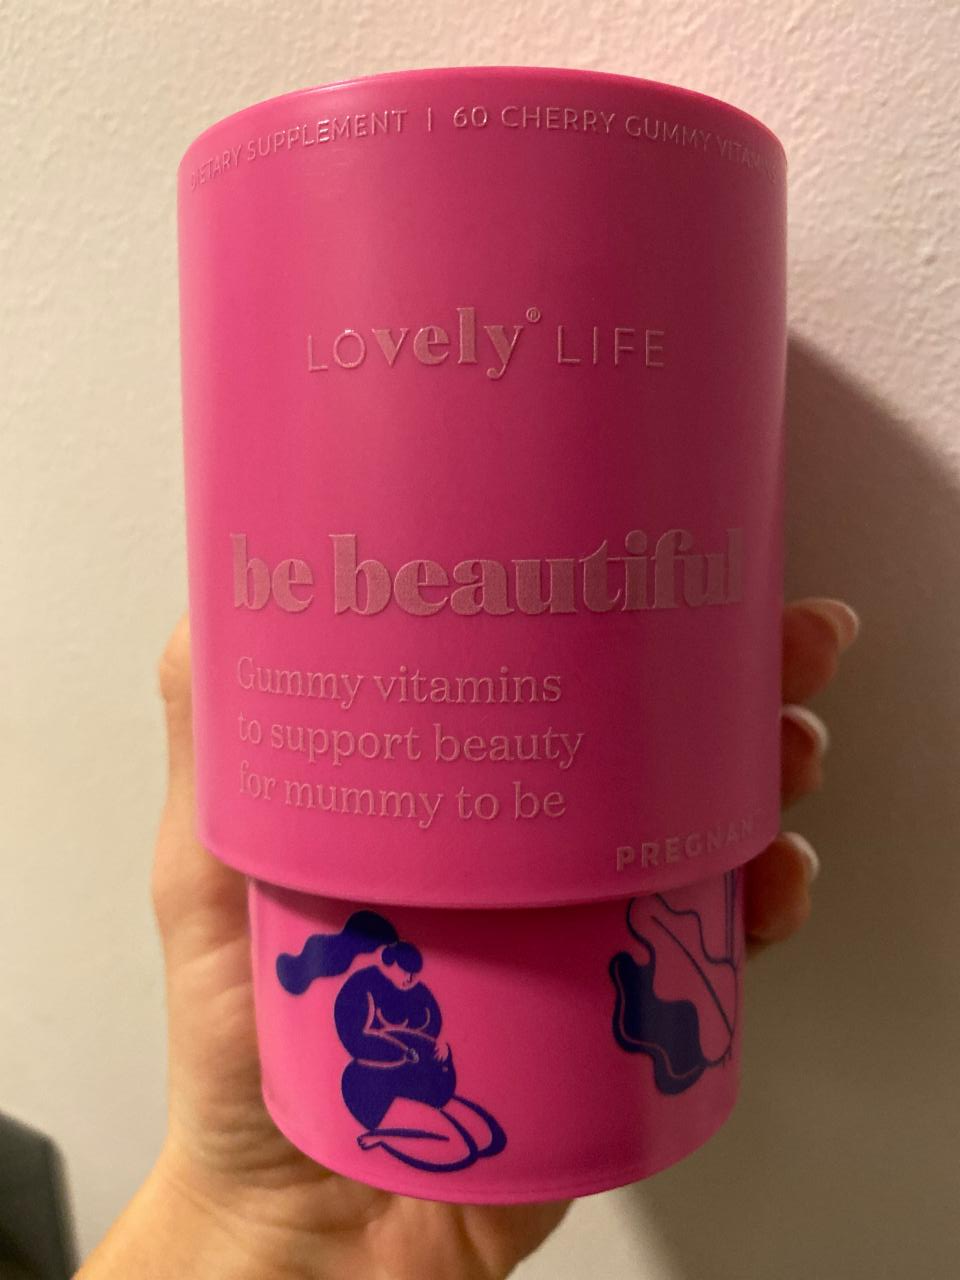 Fotografie - Be beautiful Pregnant Gummy vitamins Lovely Life